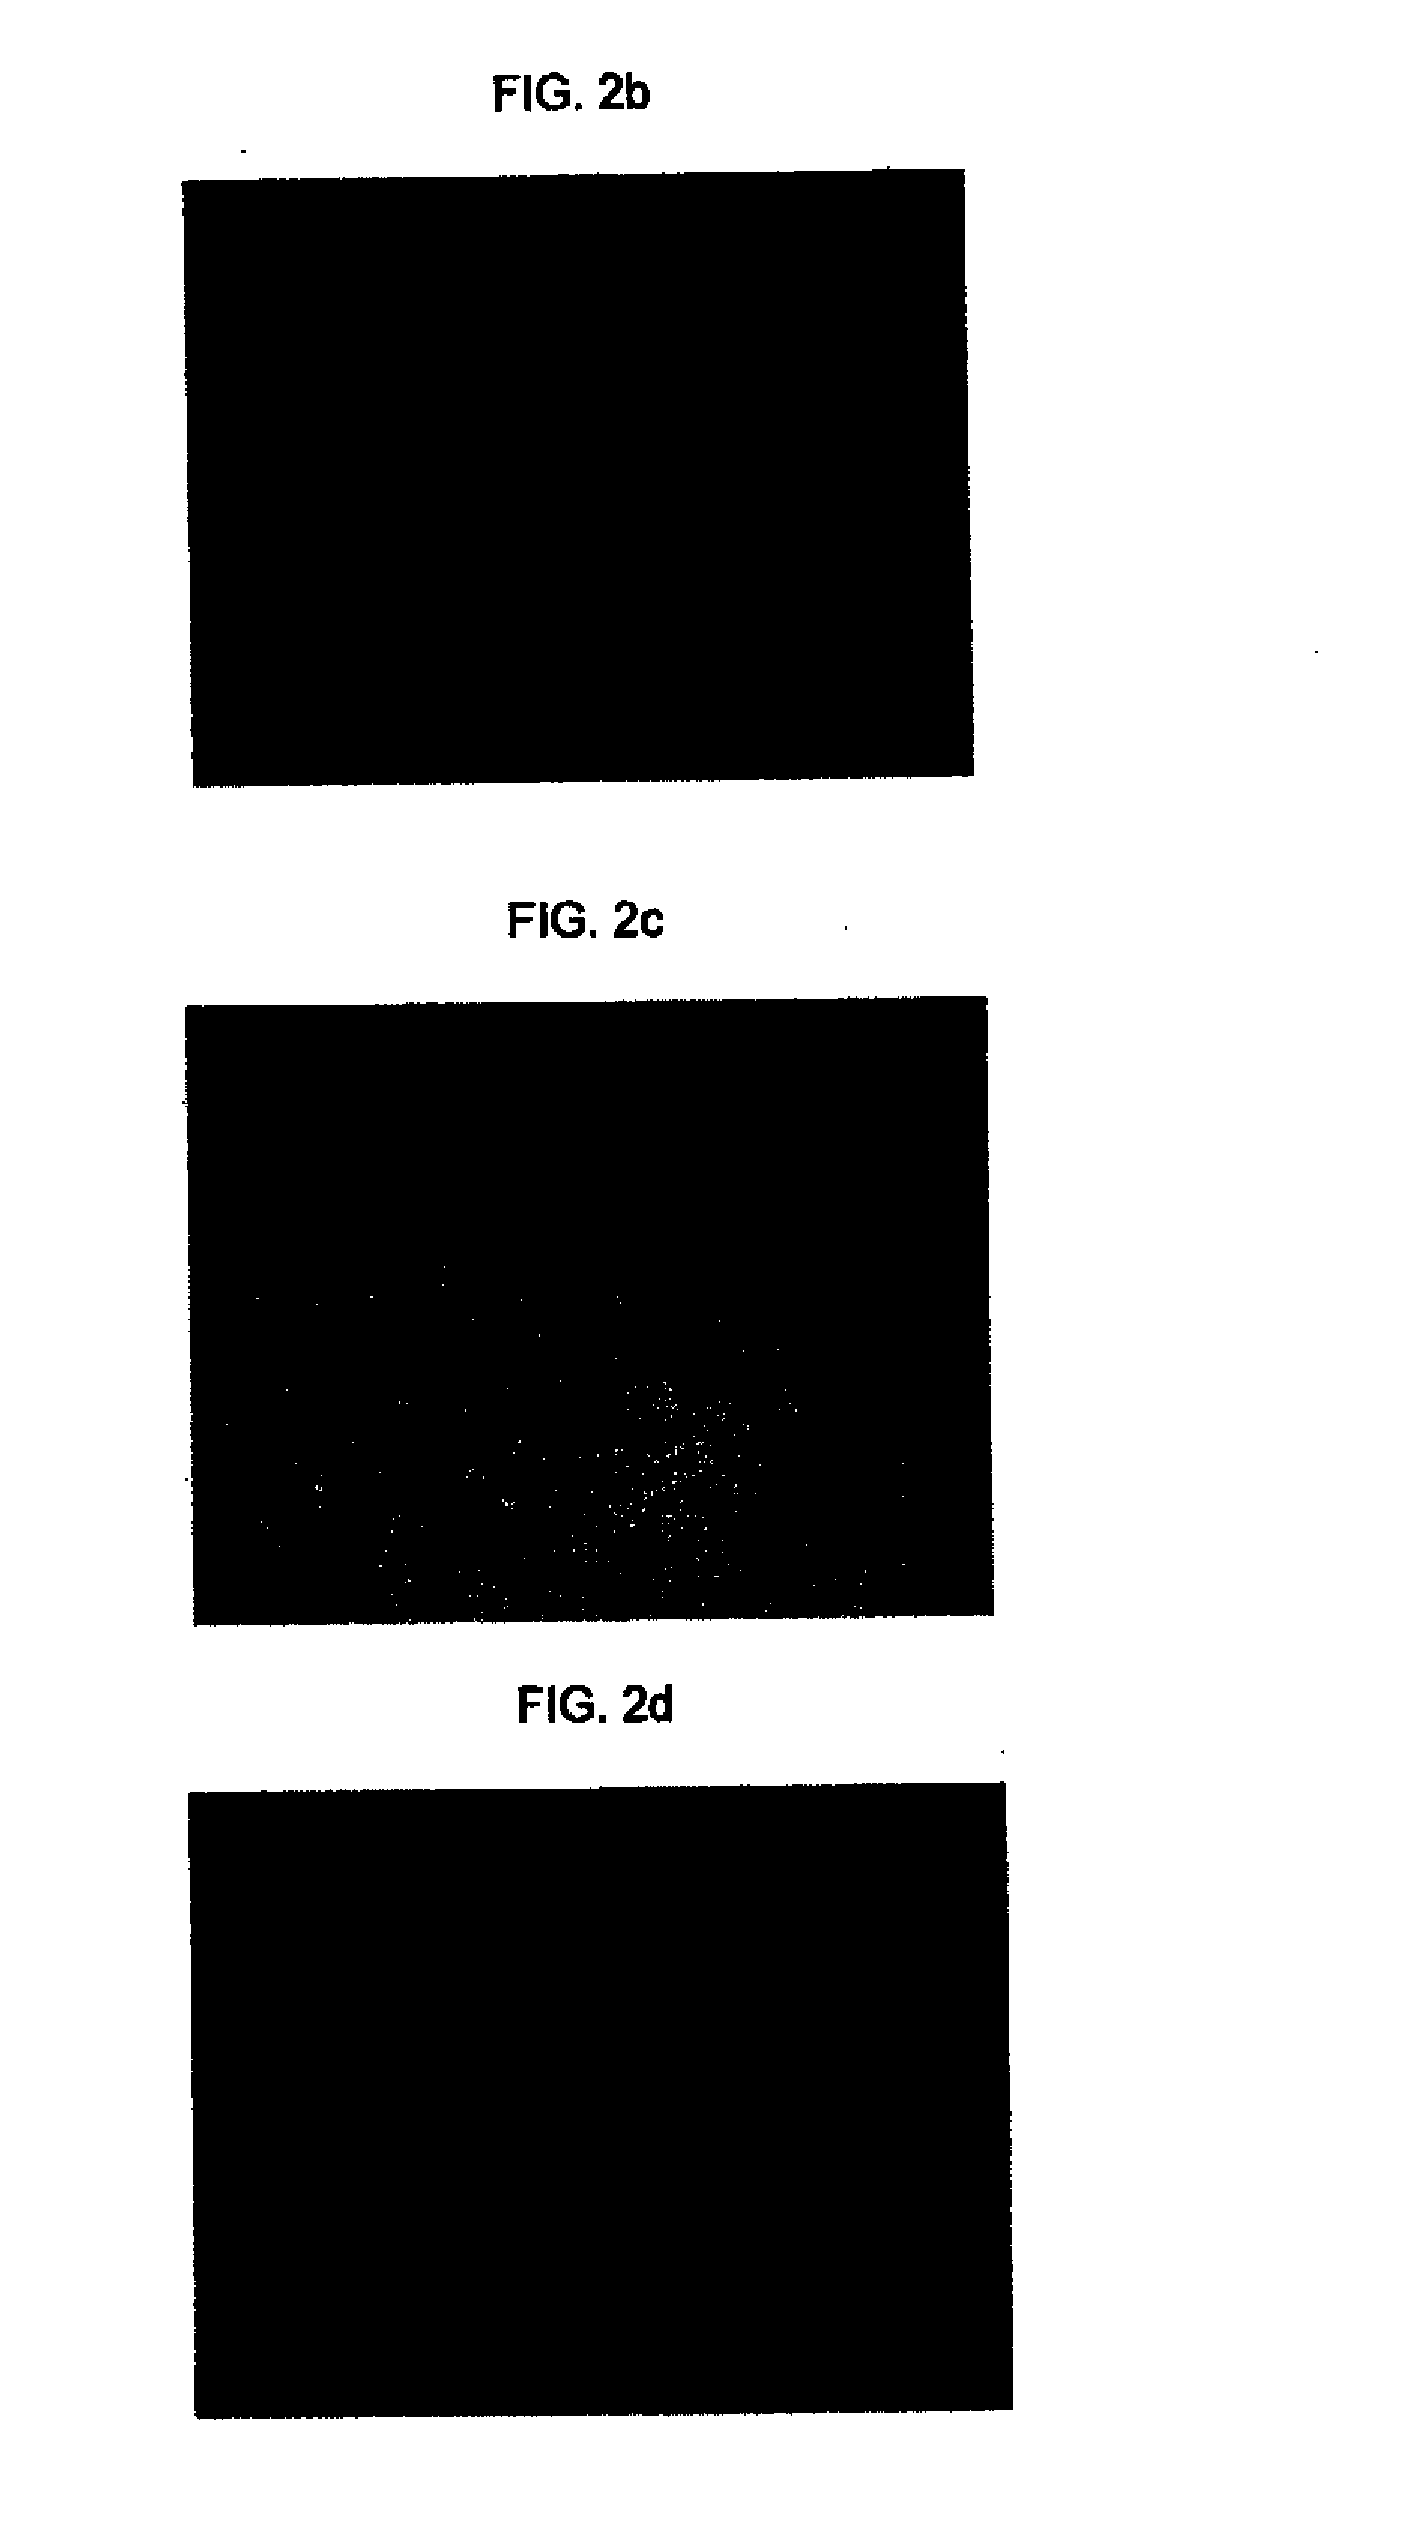 Photocurable composition, article, and method of use